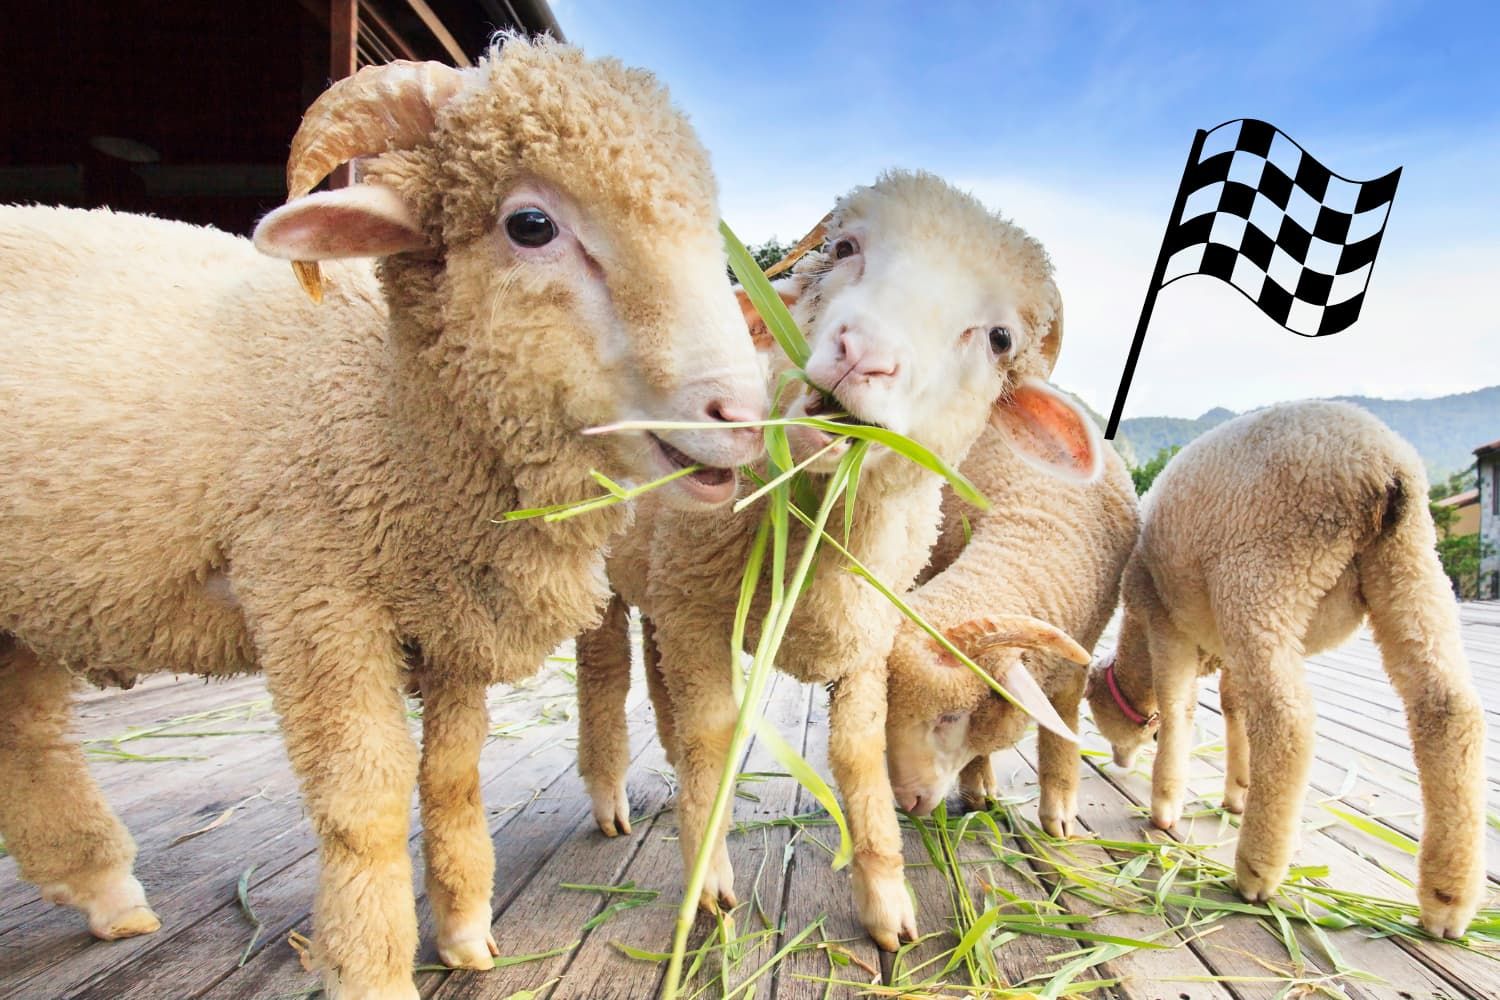 Game%20-%20OT%20Psalm%2023%20-%20The%20feed%20the%20sheep%20relay%20race-6bb58723 Love / heart